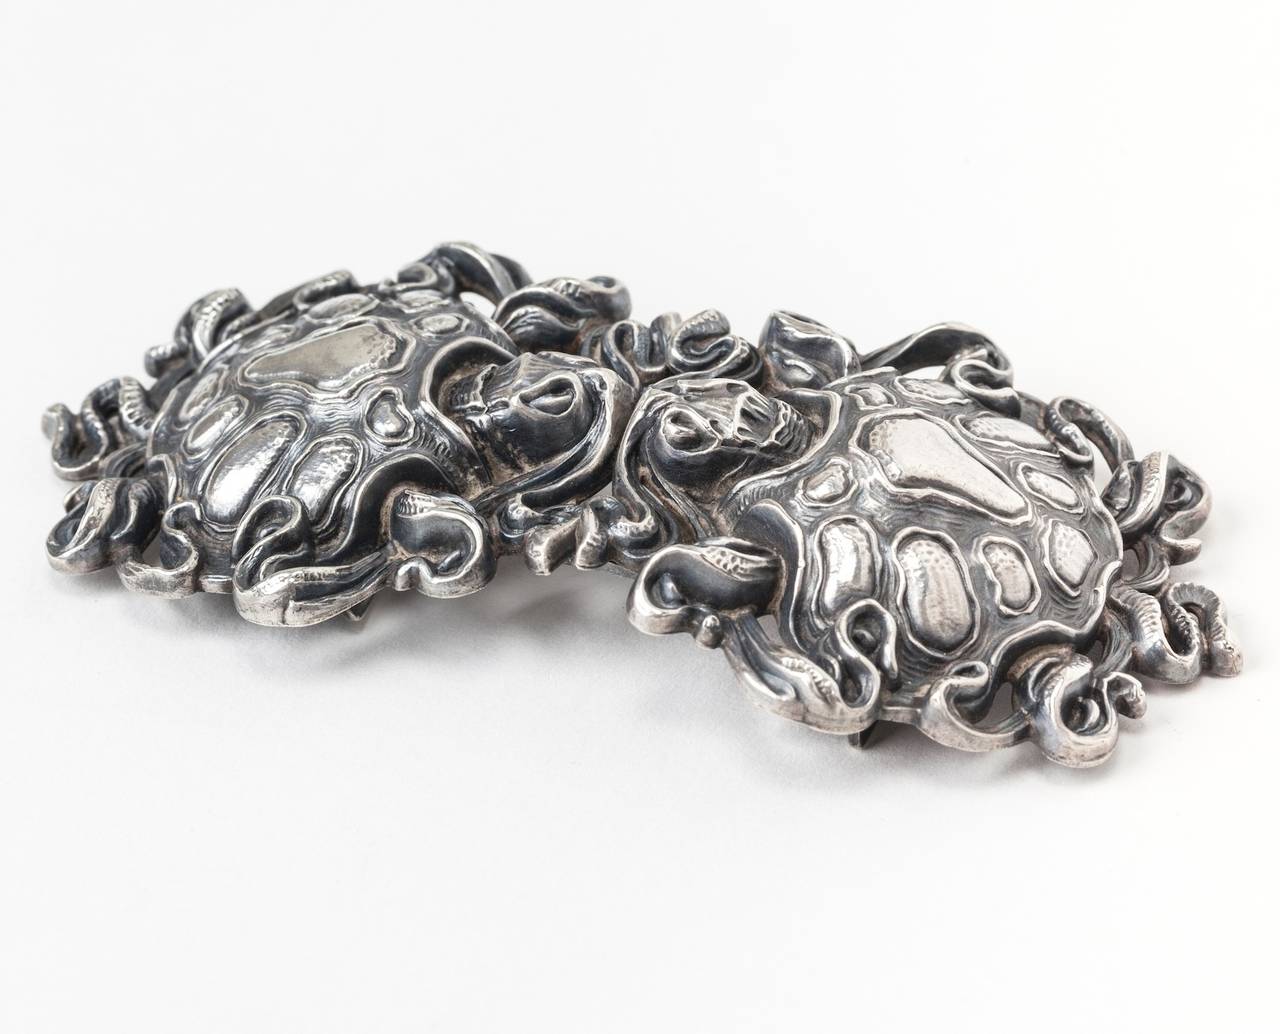 Rare Kerr Art Nouveau Turtle Buckle in the form of abstract turtles with whiplash designs, possibly seaweed, surrounding them. Done in the hollow, high relief style Kerr is known for, the subject matter is highly unusual. Amazing detailing. 1890's